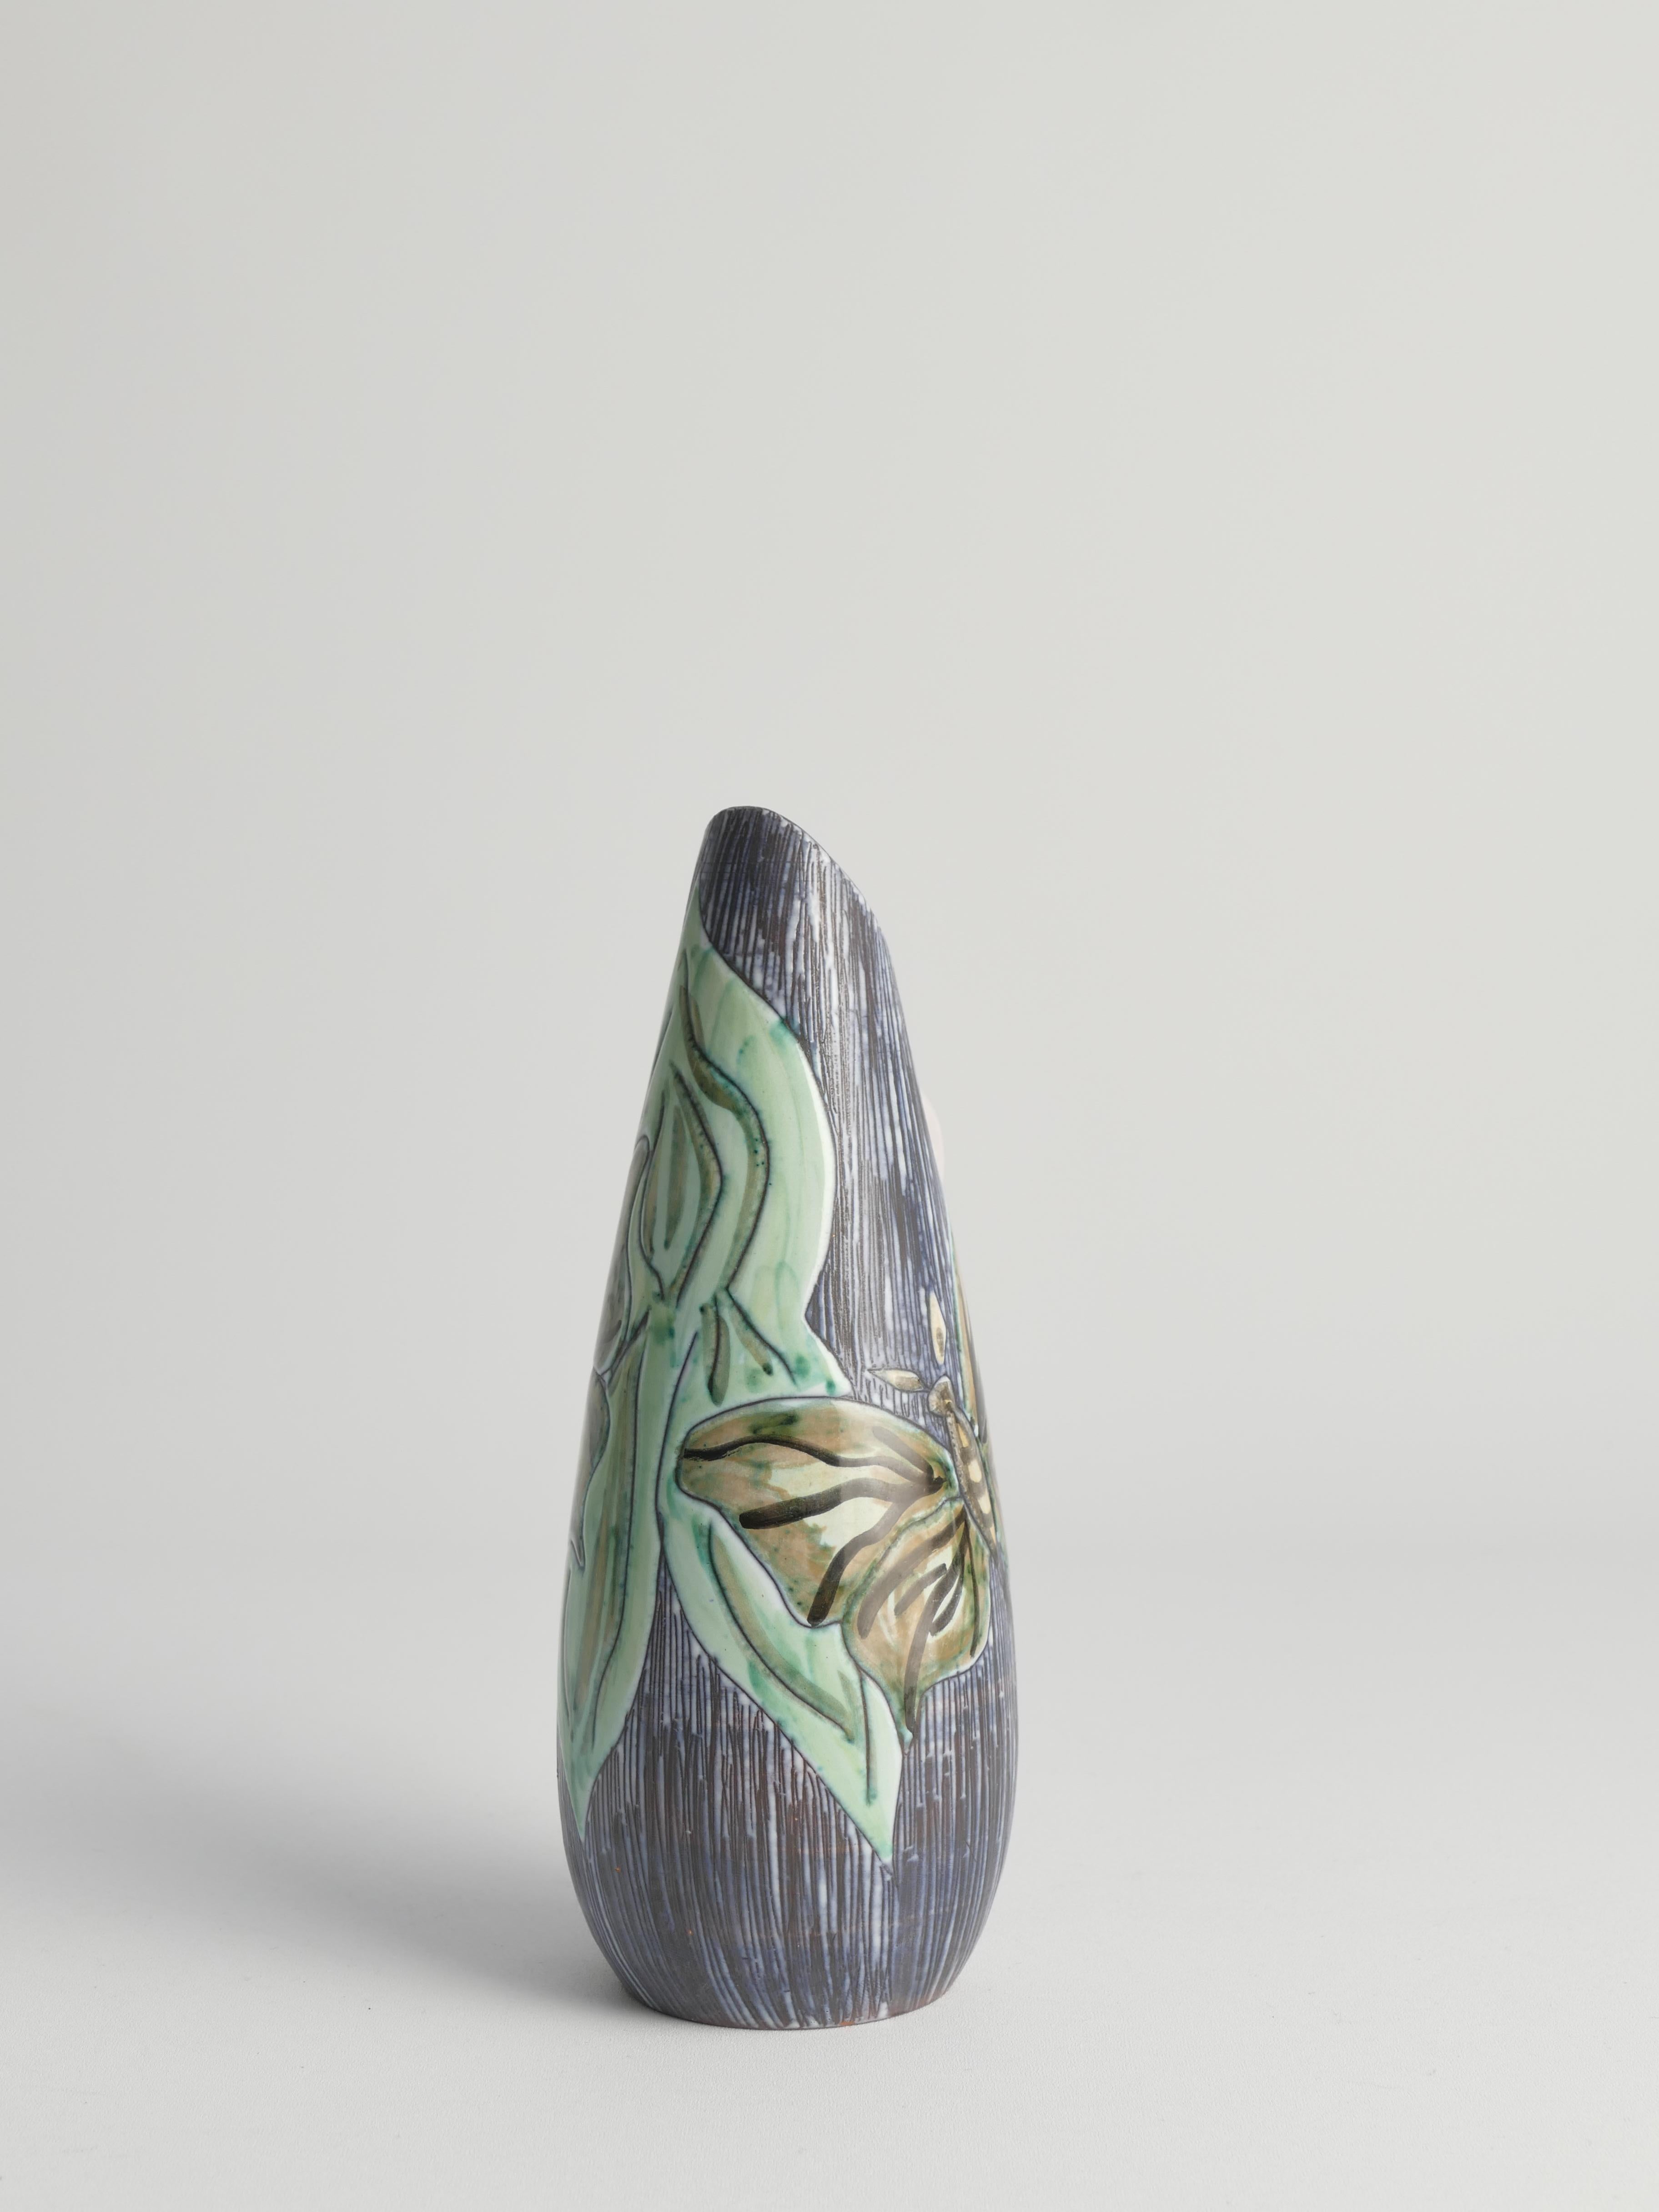 Mid-20th Century Mid-Century Modern Stoneware Vase with Sgraffito and Butterflies. Sweden, 1950s For Sale